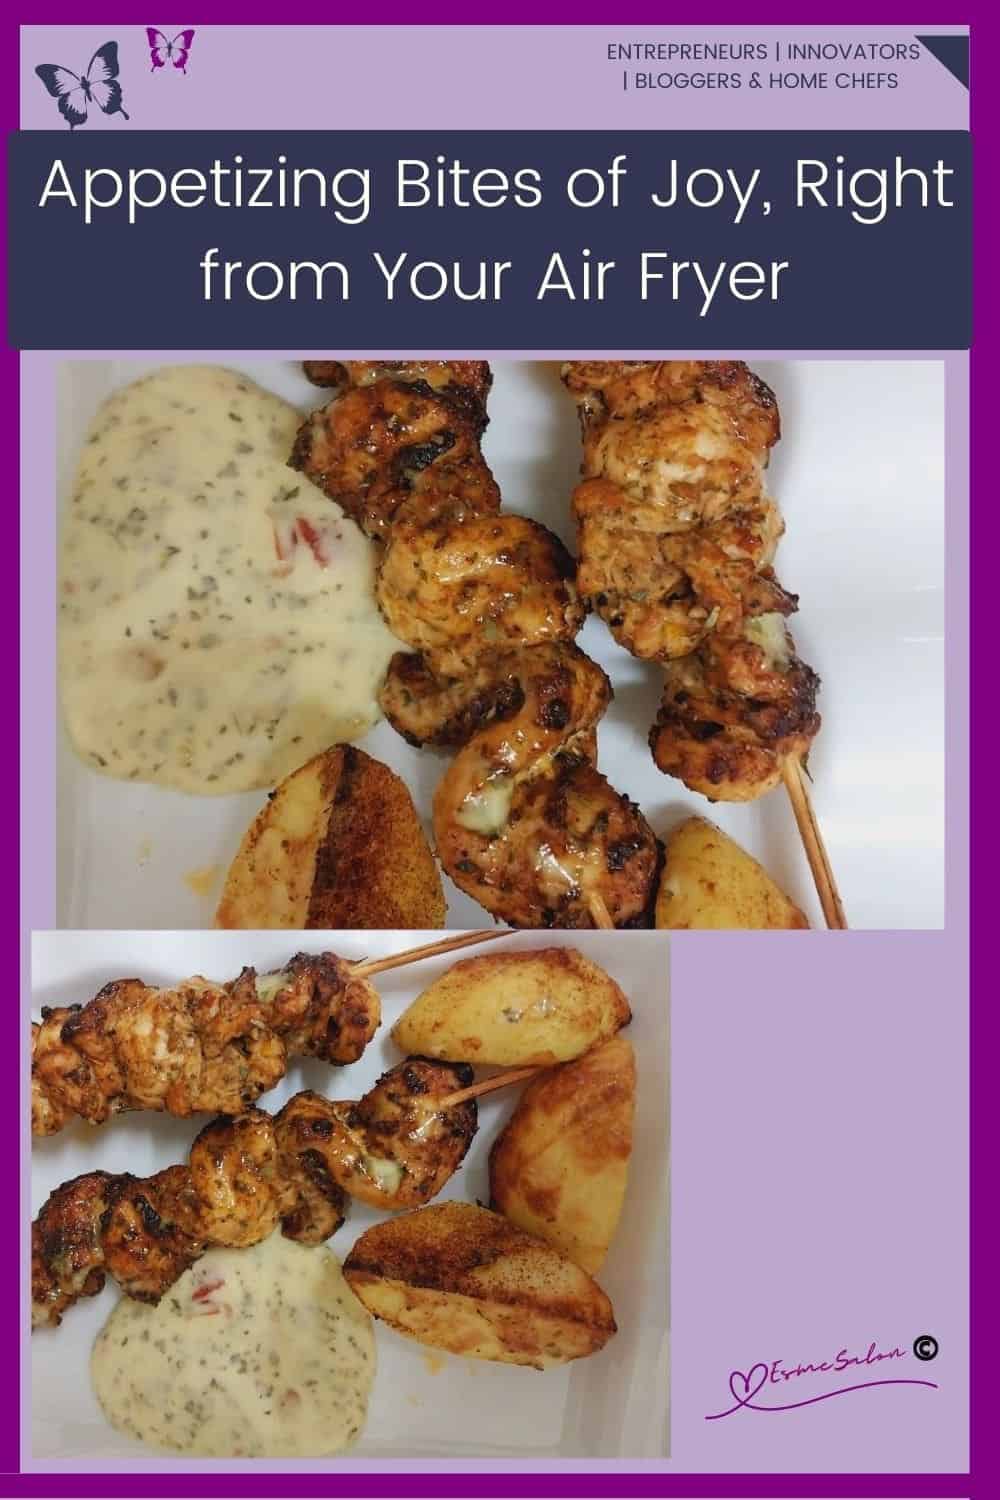 an image of Chicken pieces on Skewers made in the Air Fryer